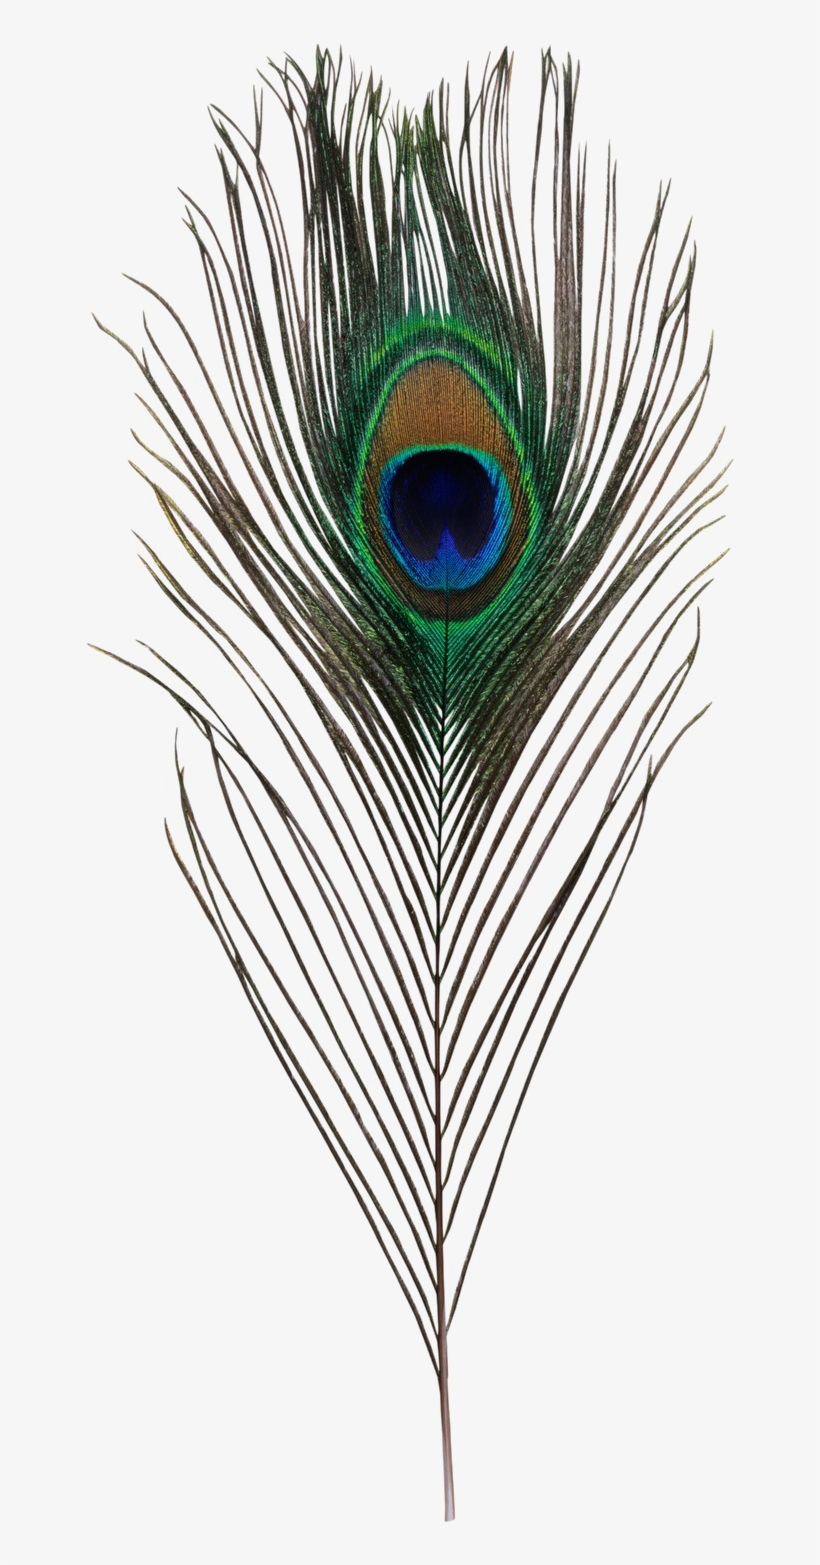 Krishna's Simplest Accessories: A Peacock Feather Afm A Flute - 640x640 -  jpeg | Flute drawing, Feather painting, Manga art